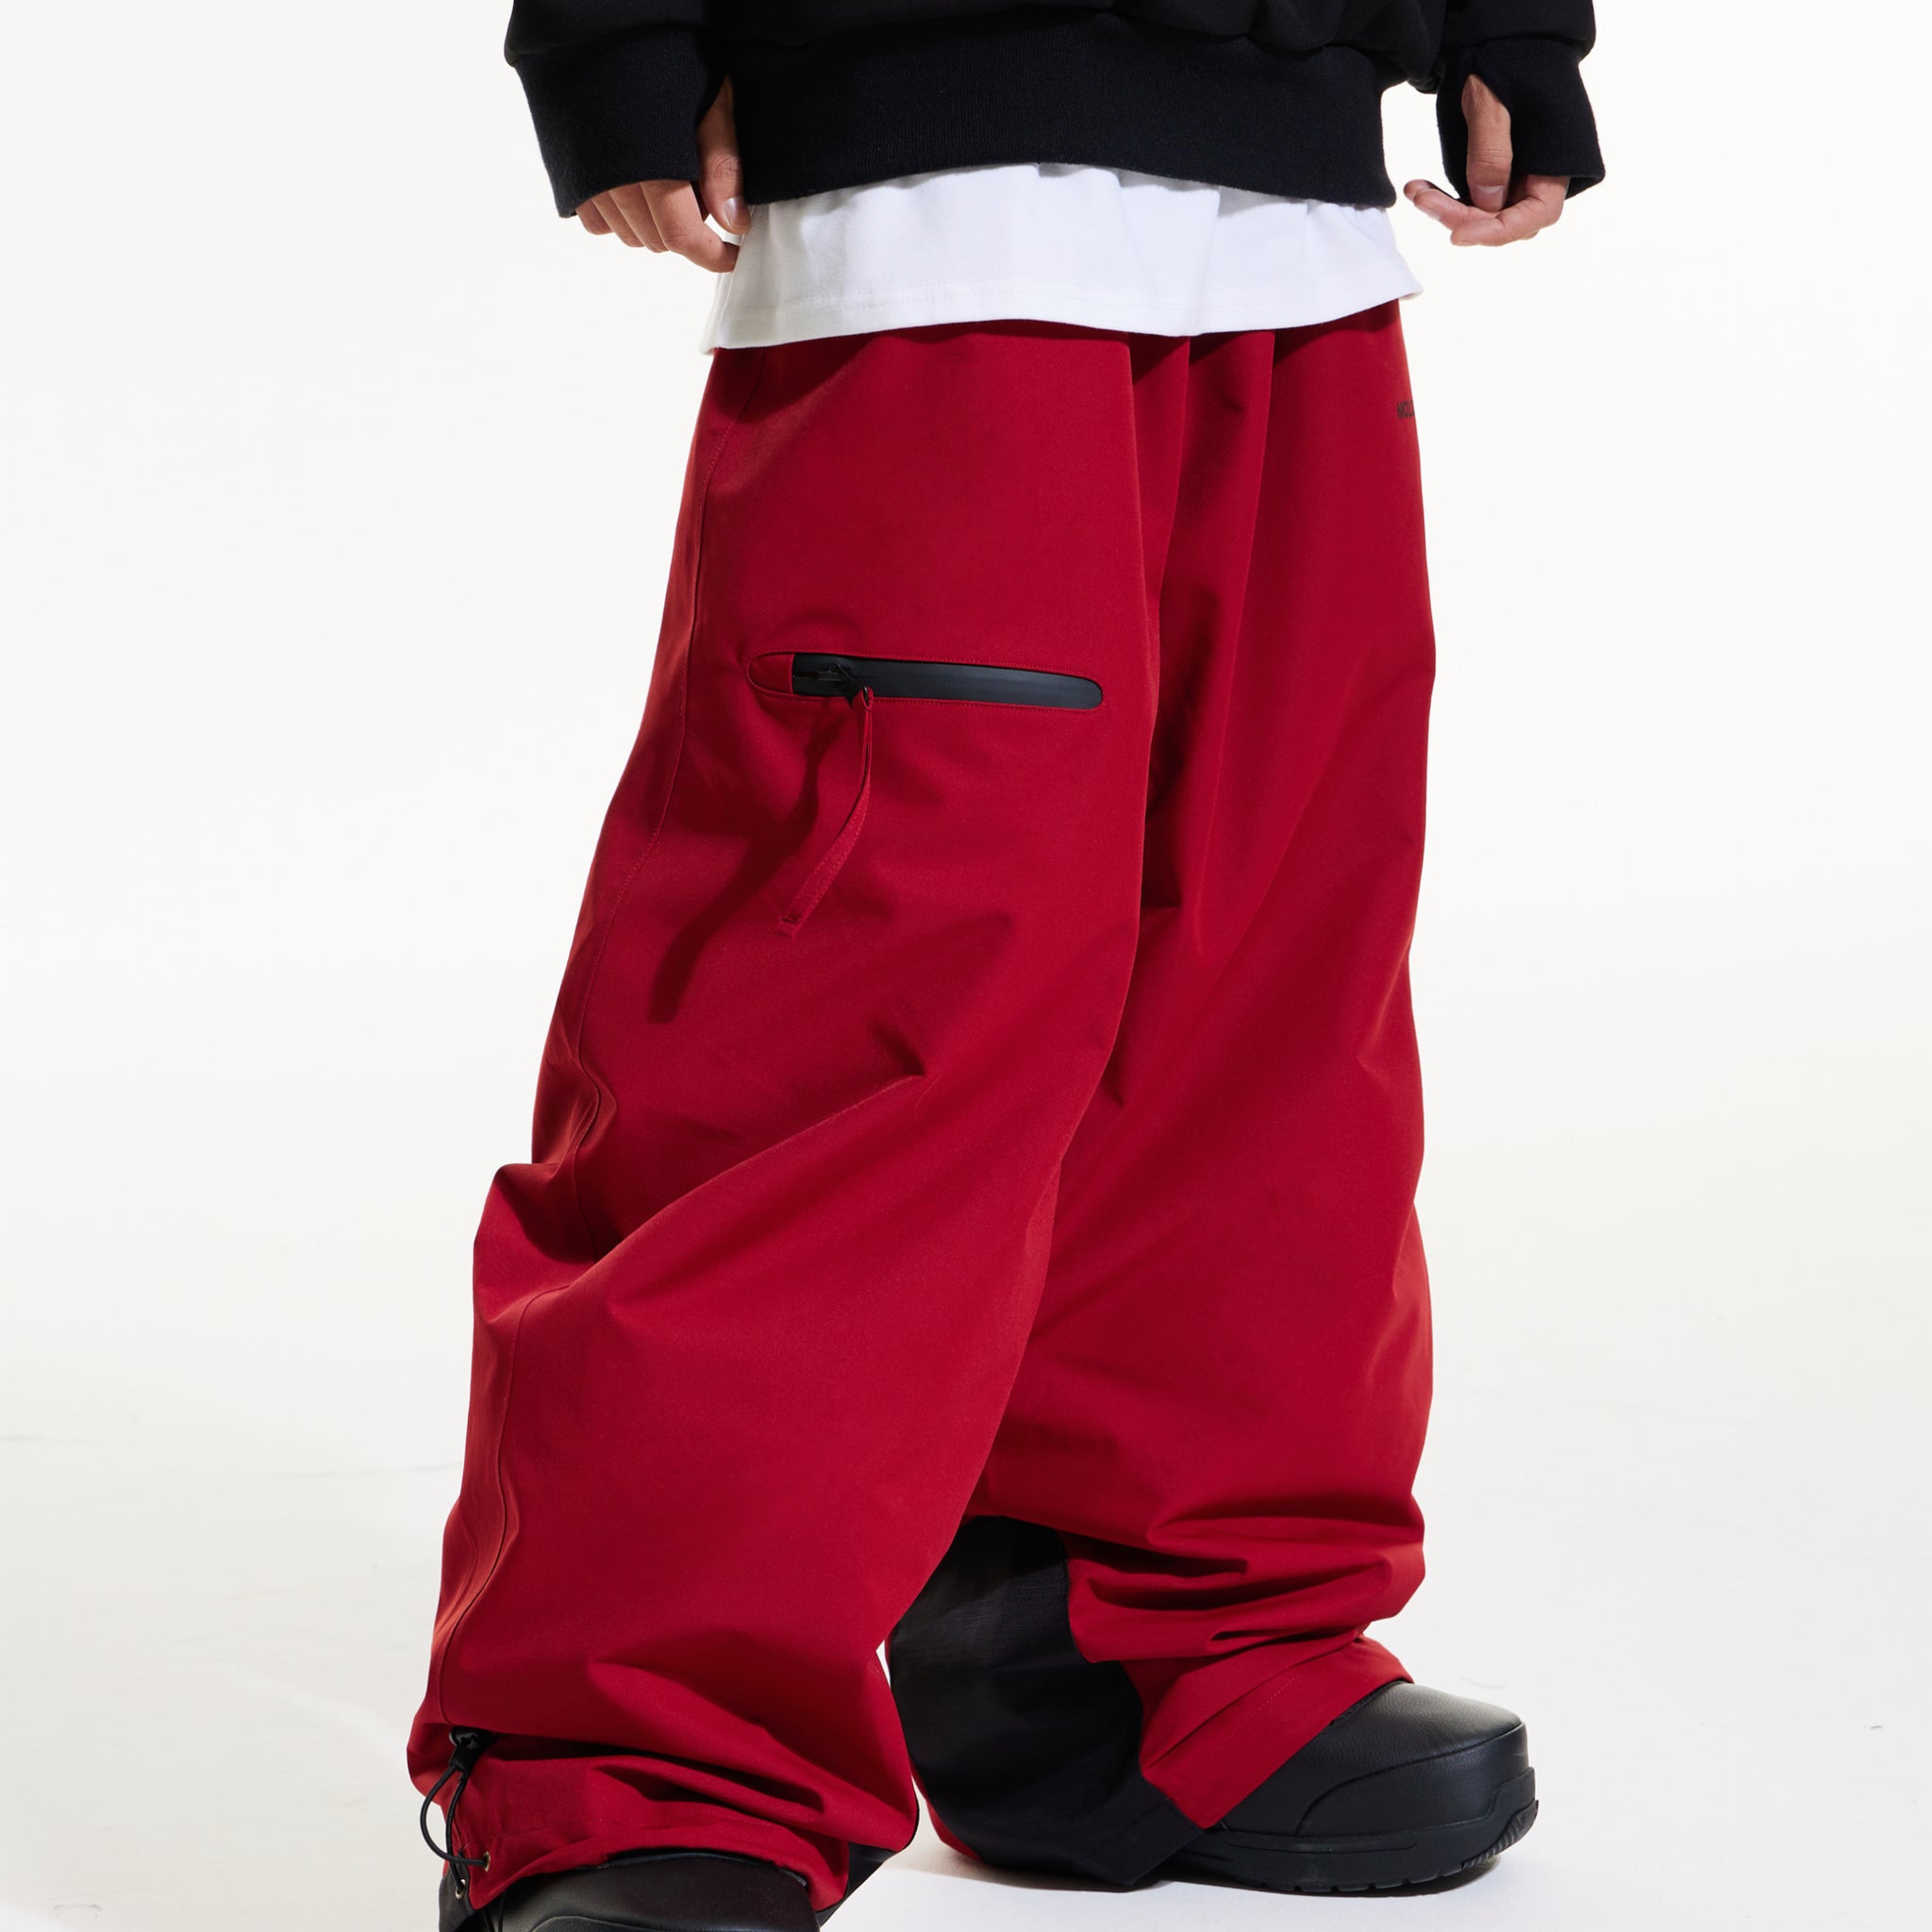 MOLOCOSTER Insulated Shell Snow Pants - Red Wine